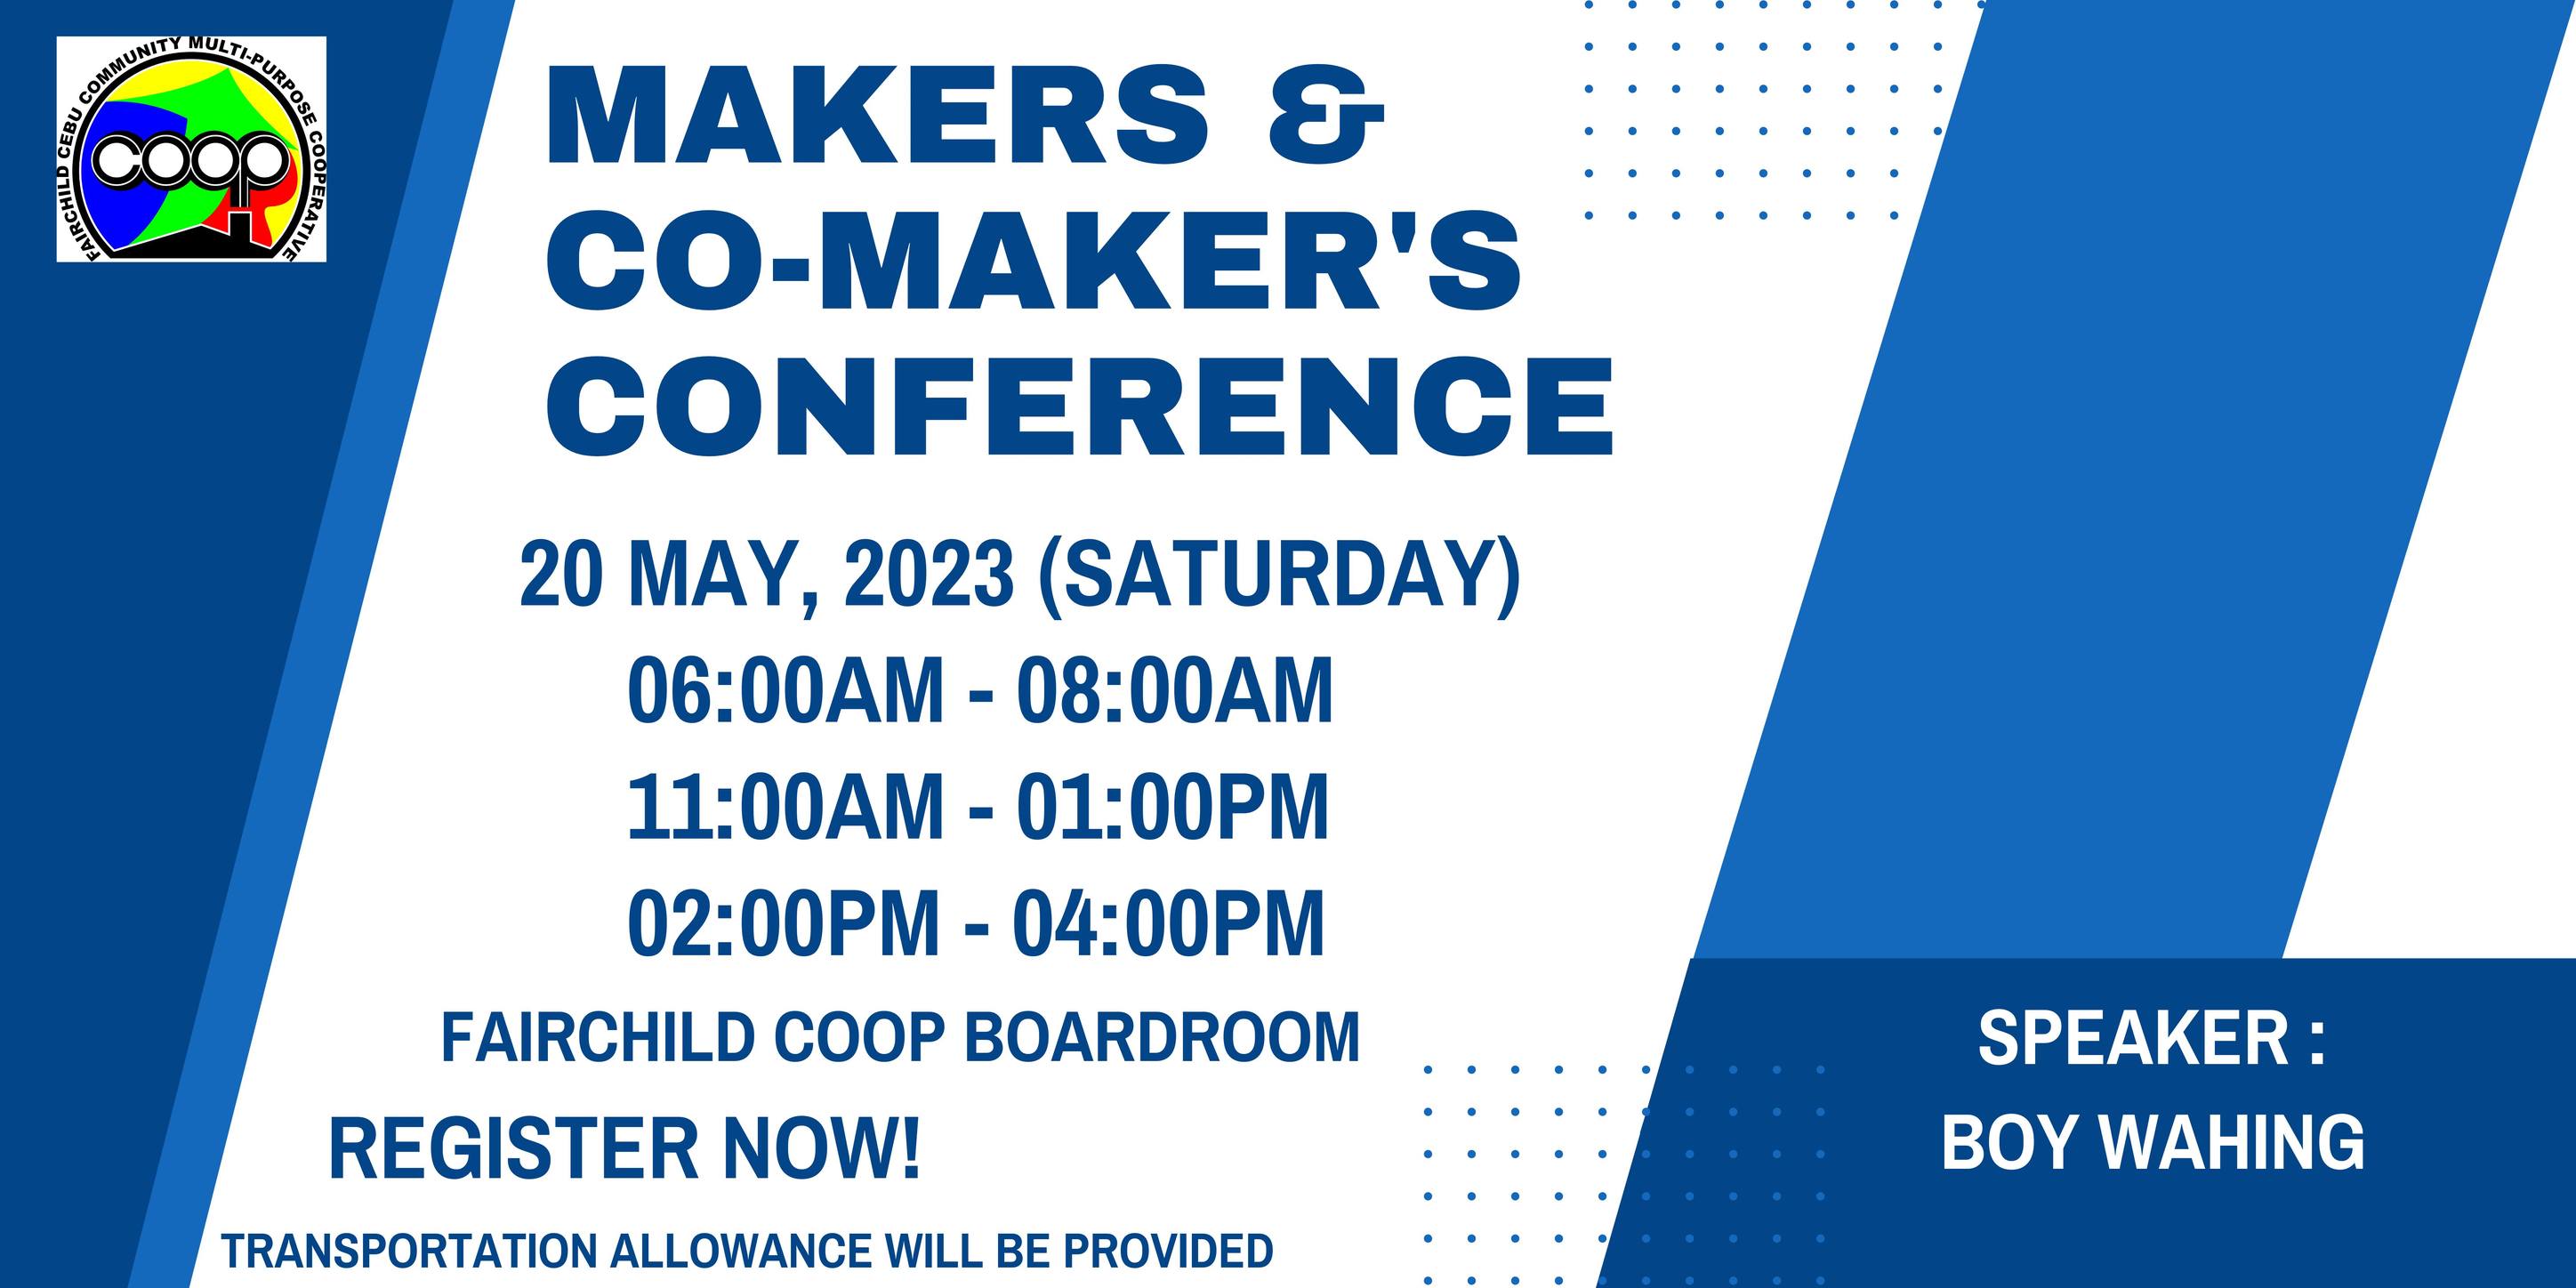 MAKERS AND CO-MAKERS CONFERENCE